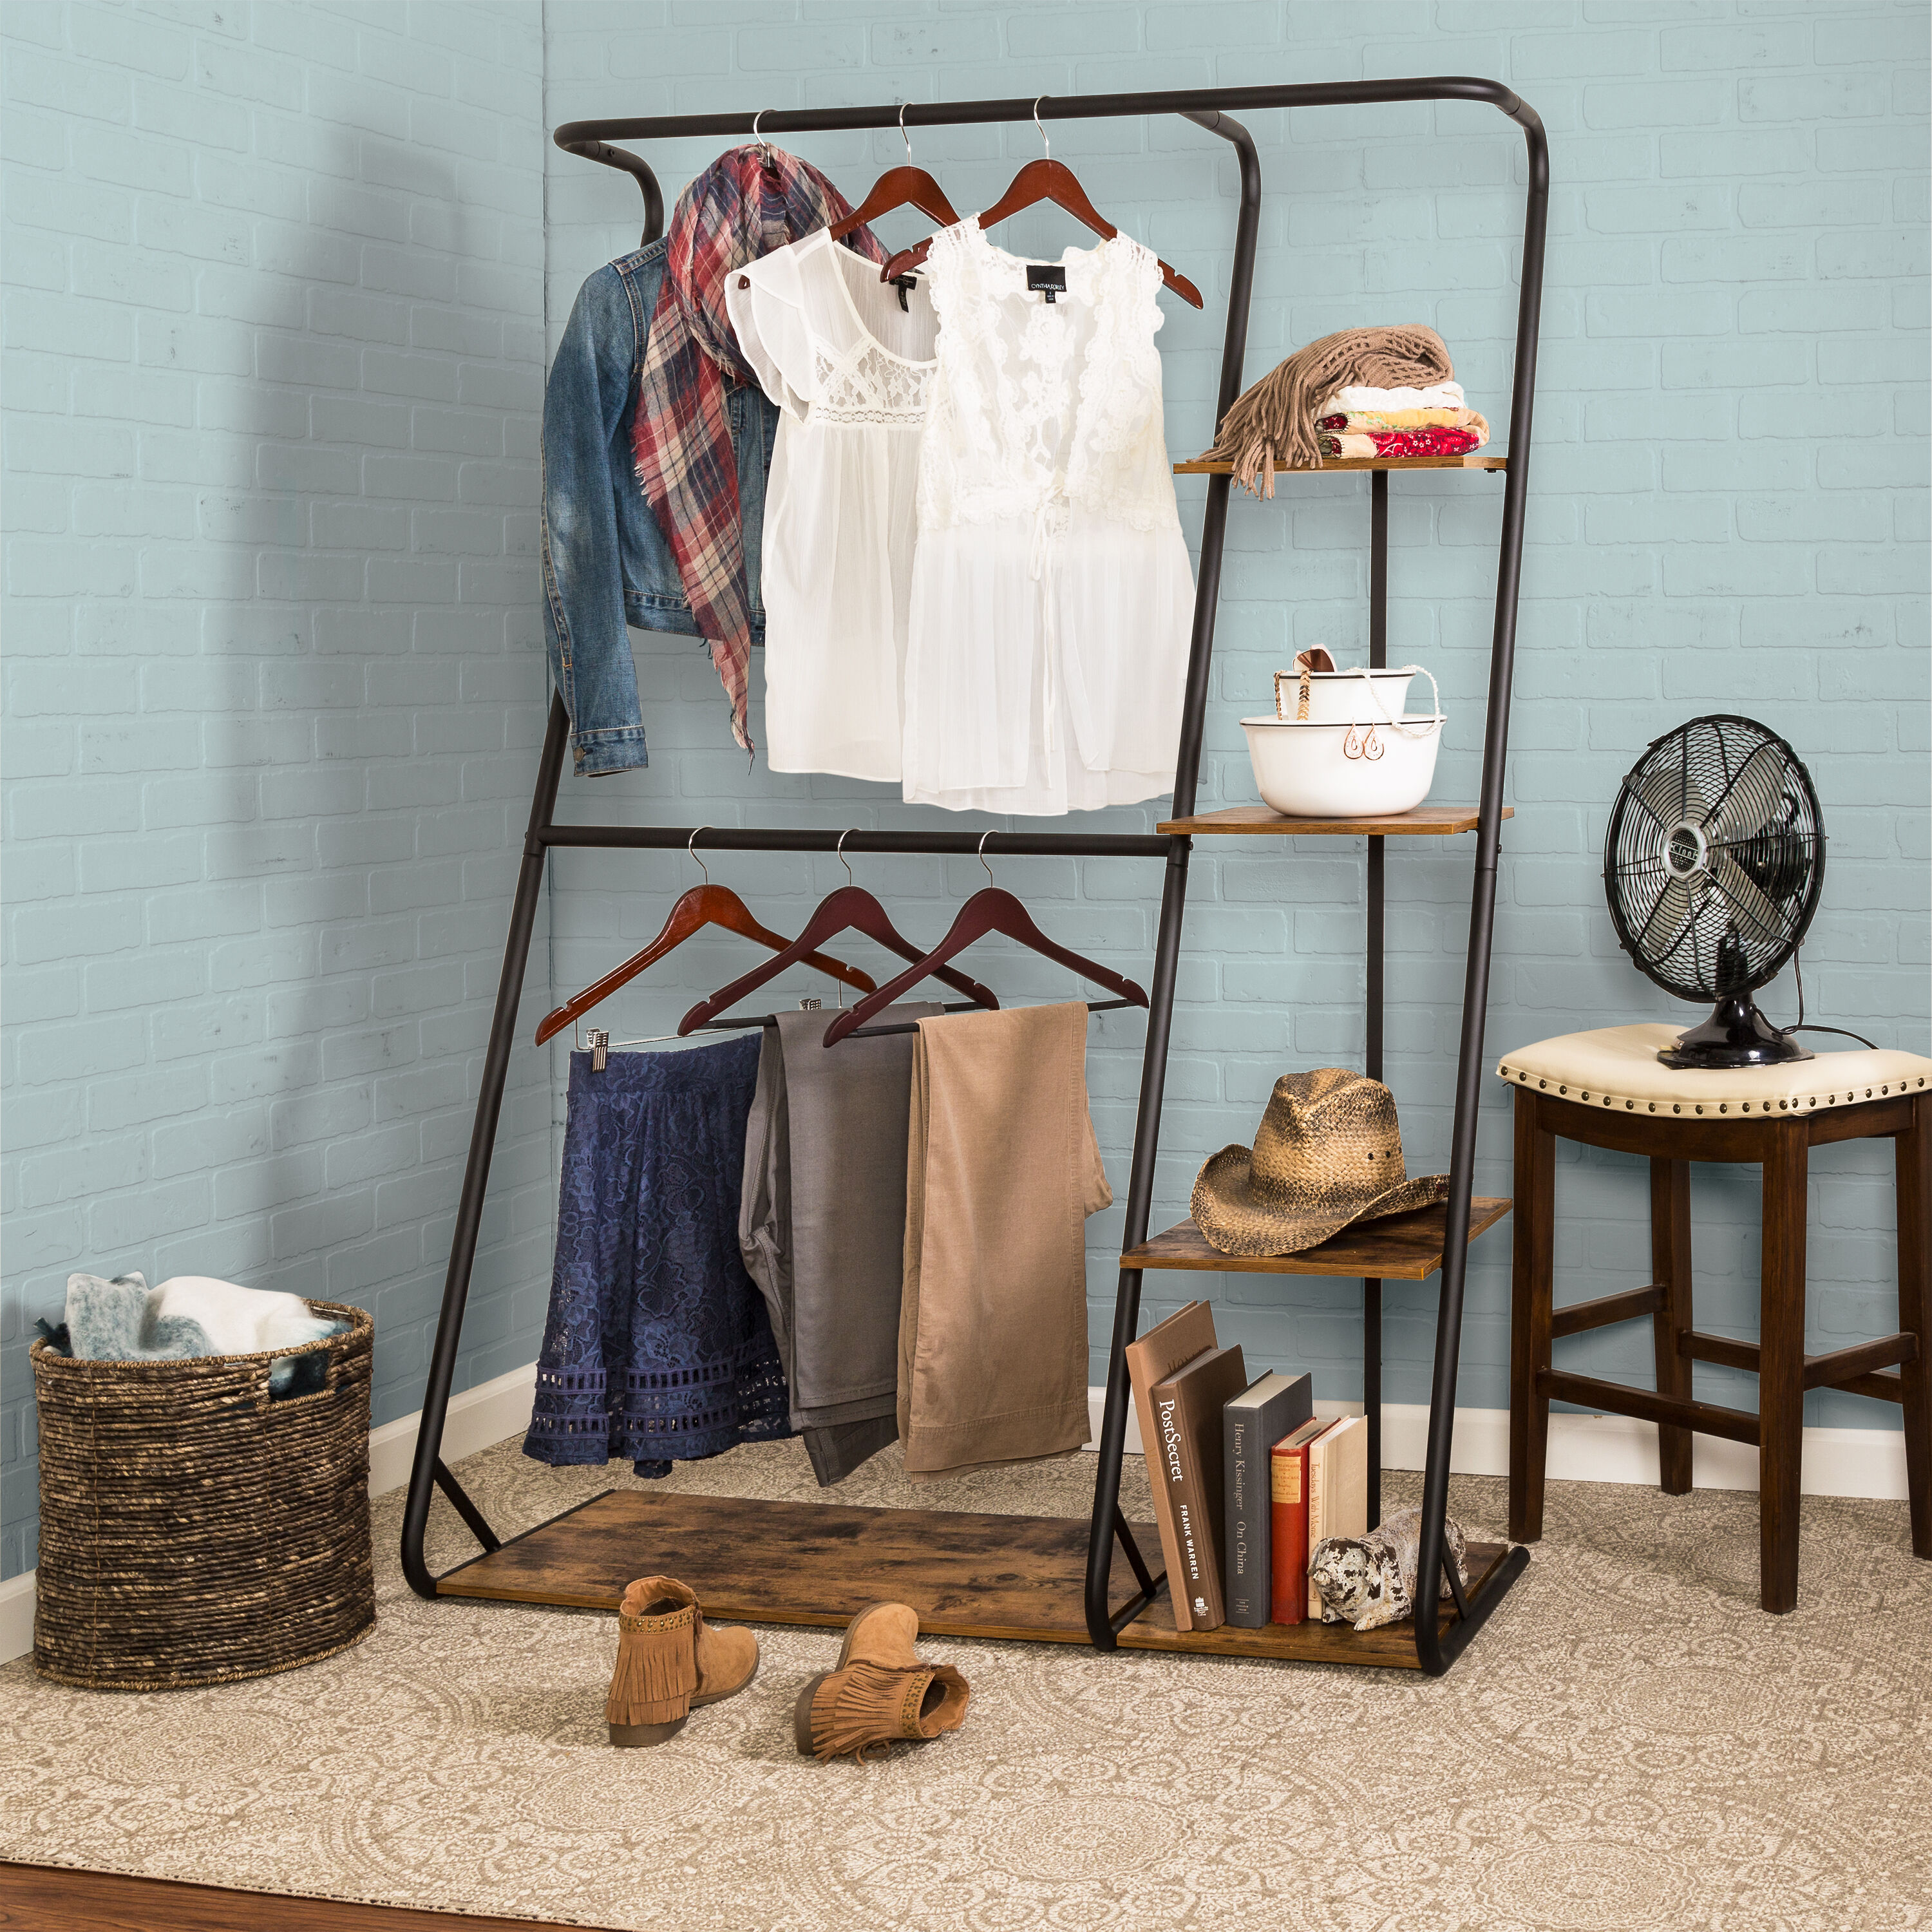 Industrial Clothes Rack, Wall-Mounted Closet Rod, Space-Saving Clothing  Rack for Hanging Clothes, Heavy Duty Metal Pipe Hanging Bar for Laundry  Room, Closet - China Metal Clothing Rack and Clothes Garment Coat Rack